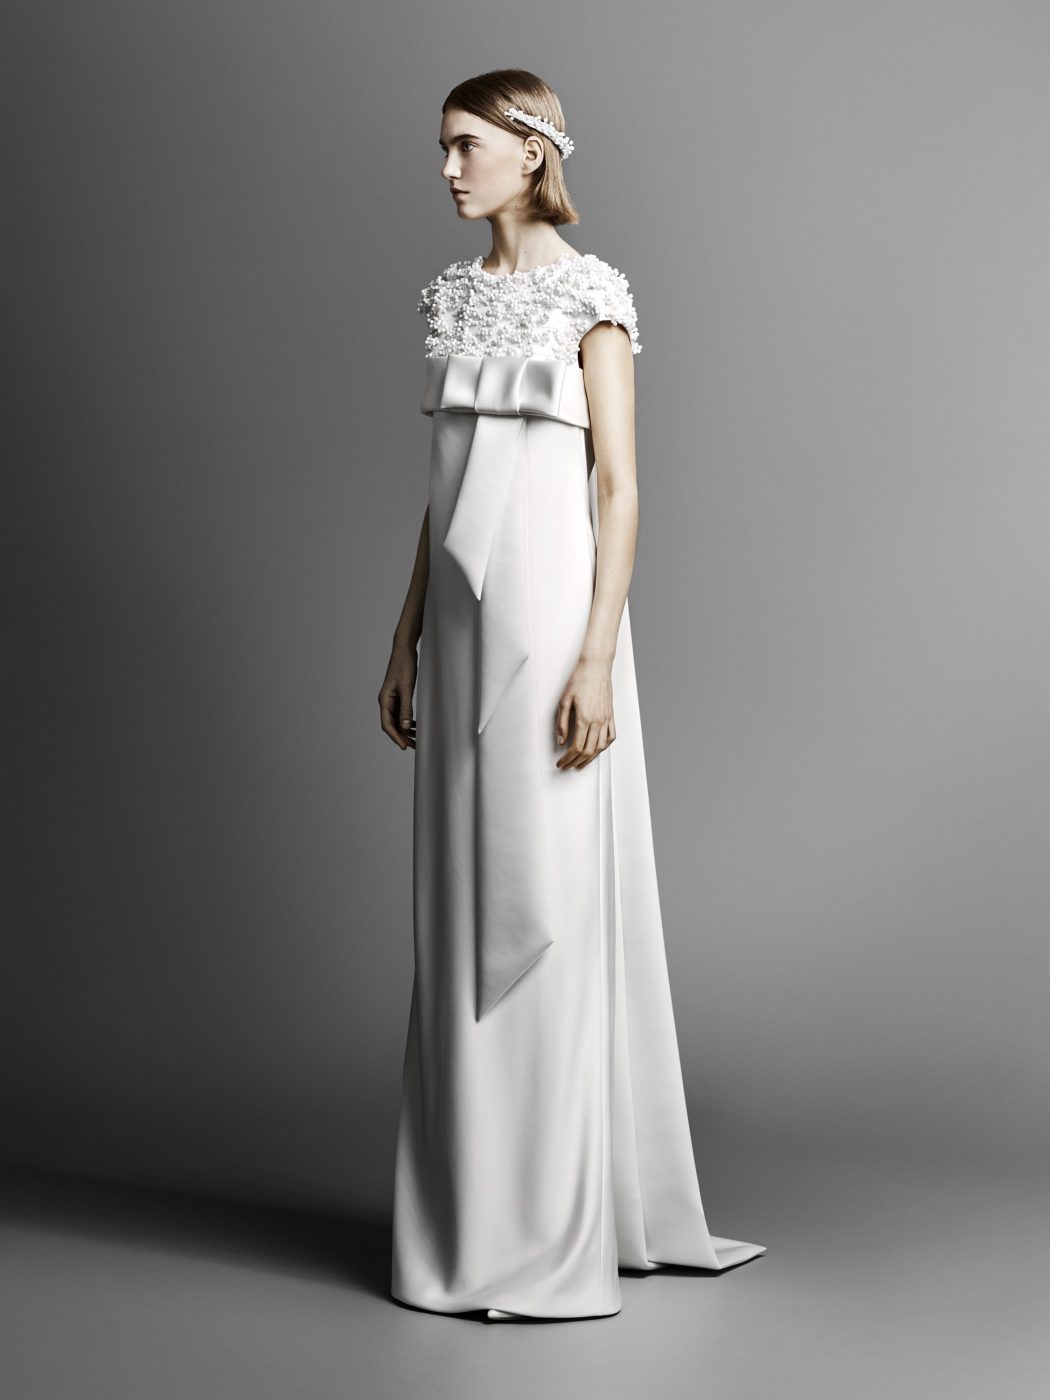 viktor-rolf-collection-robe-mariee-printemps-2019-millemariages-2